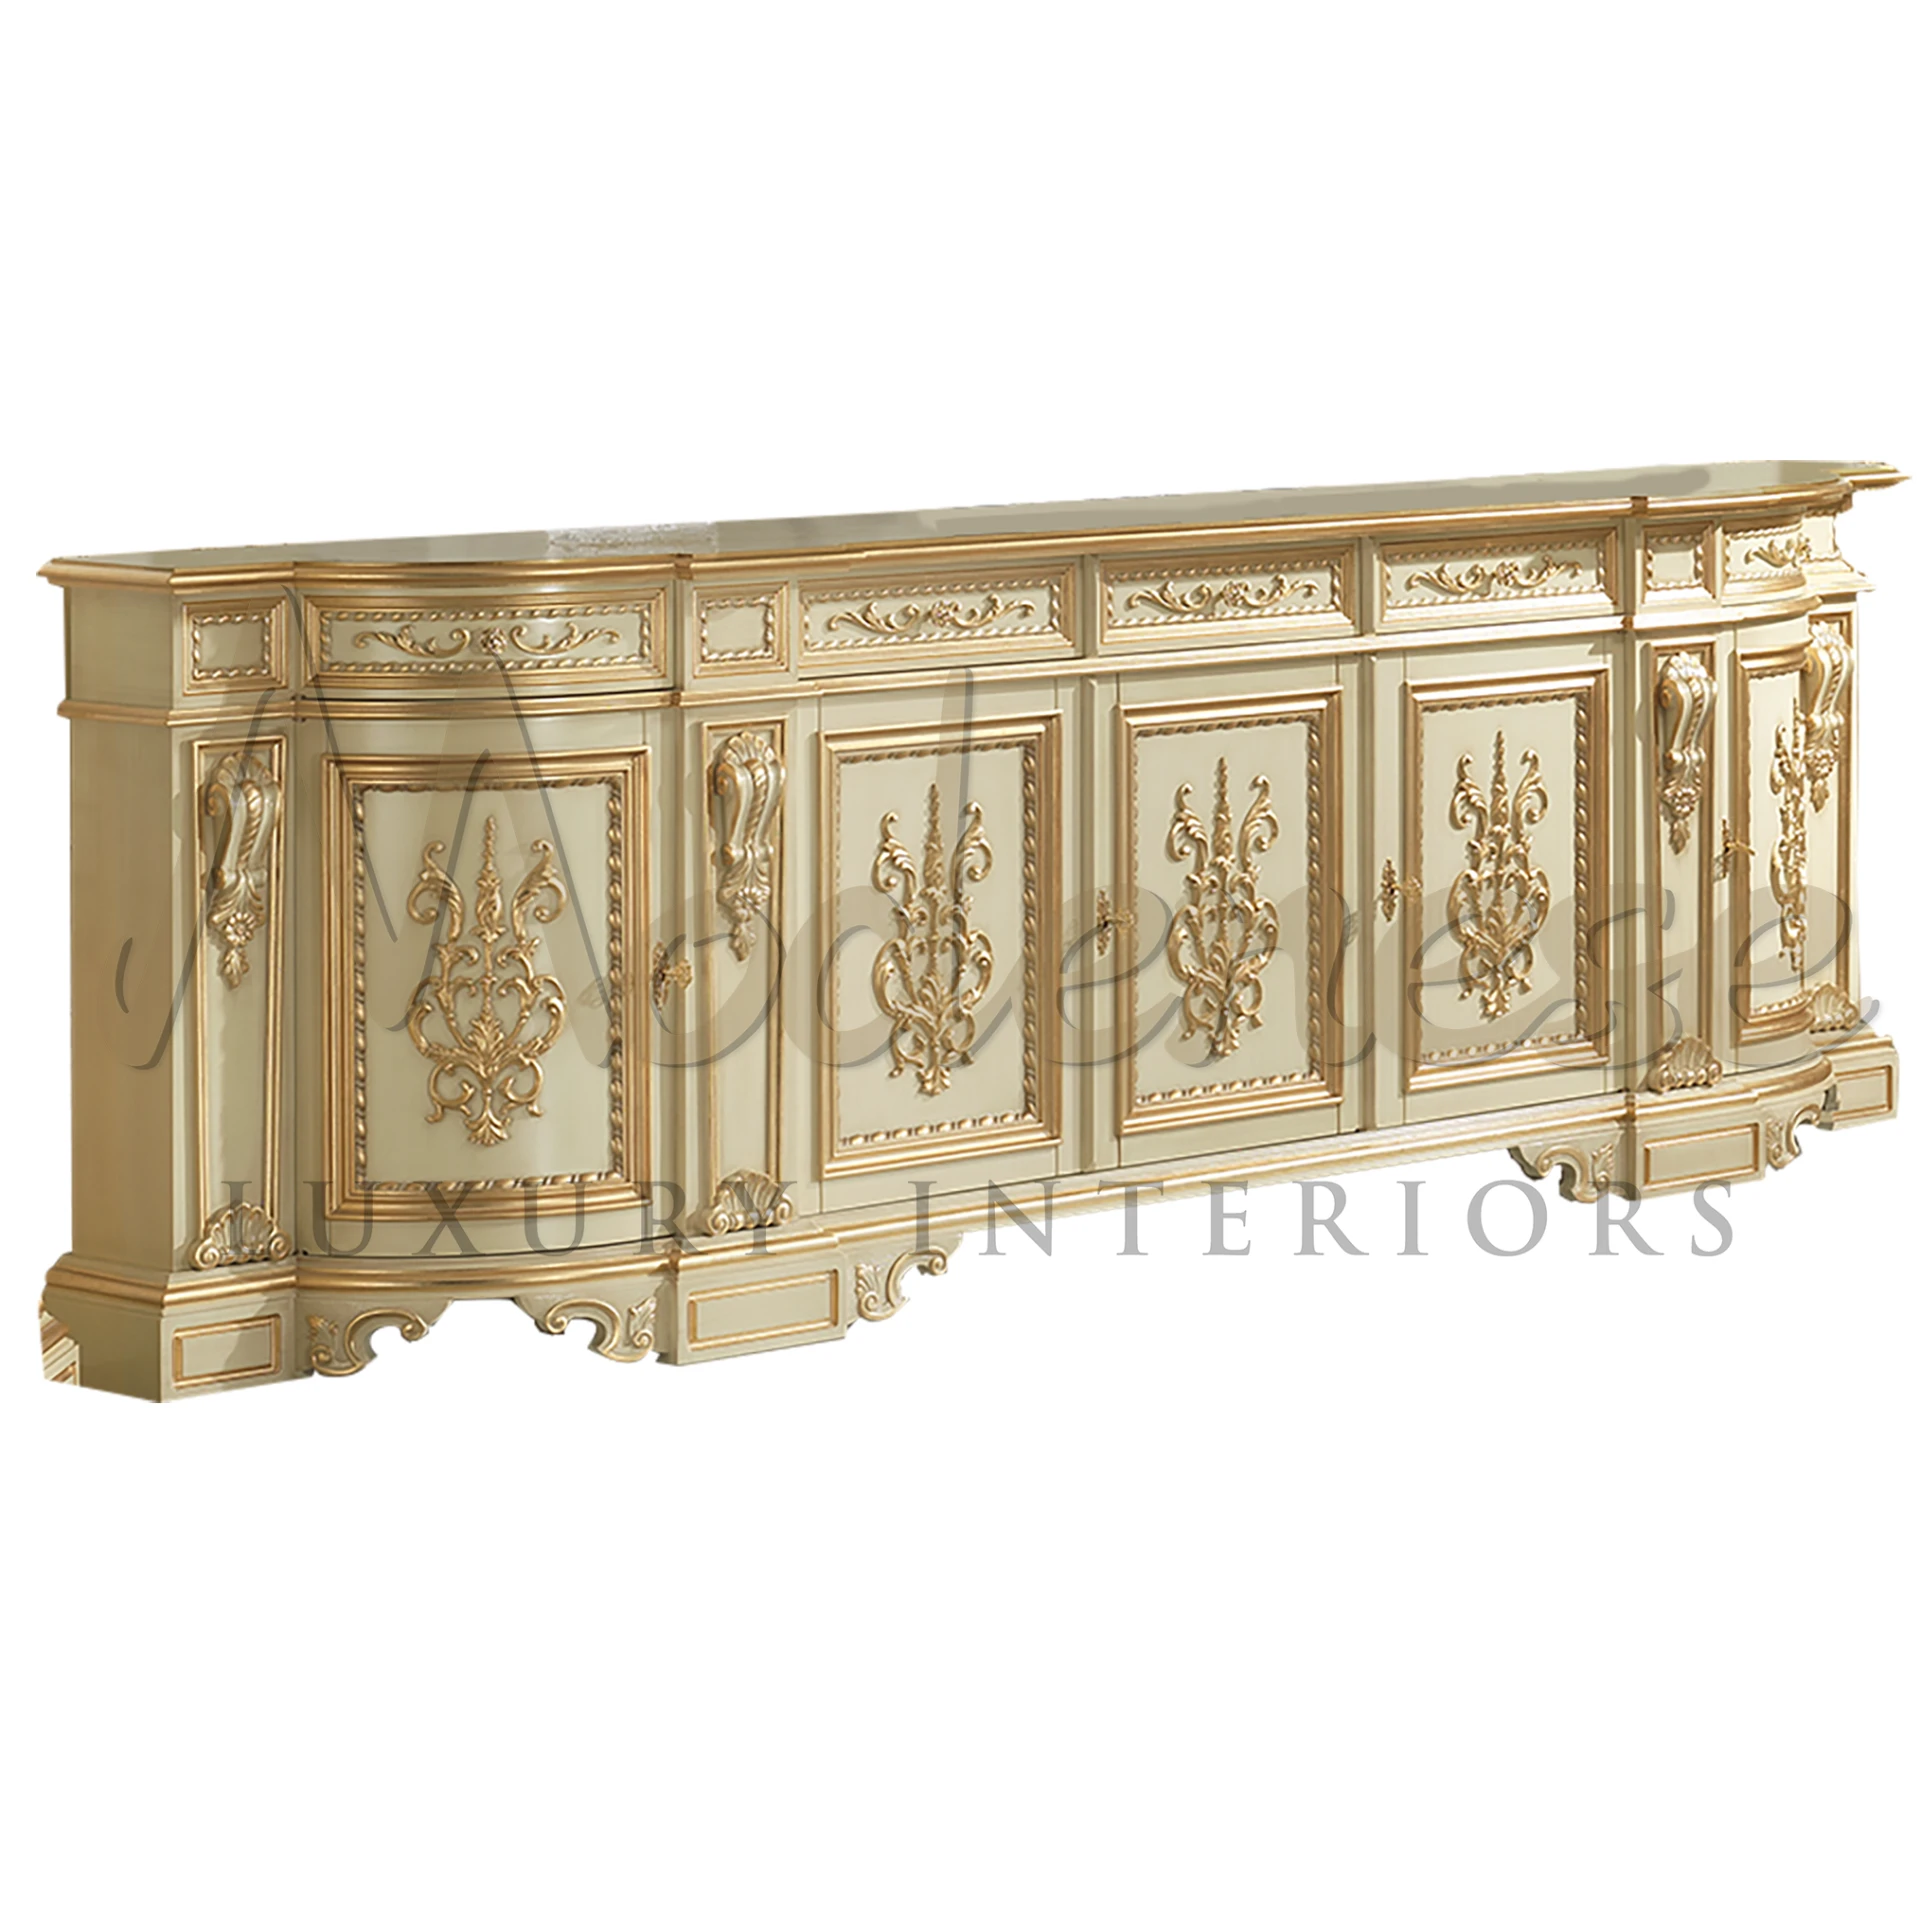 Lovely Imperial Carved Wood Sideboard with golden designs.